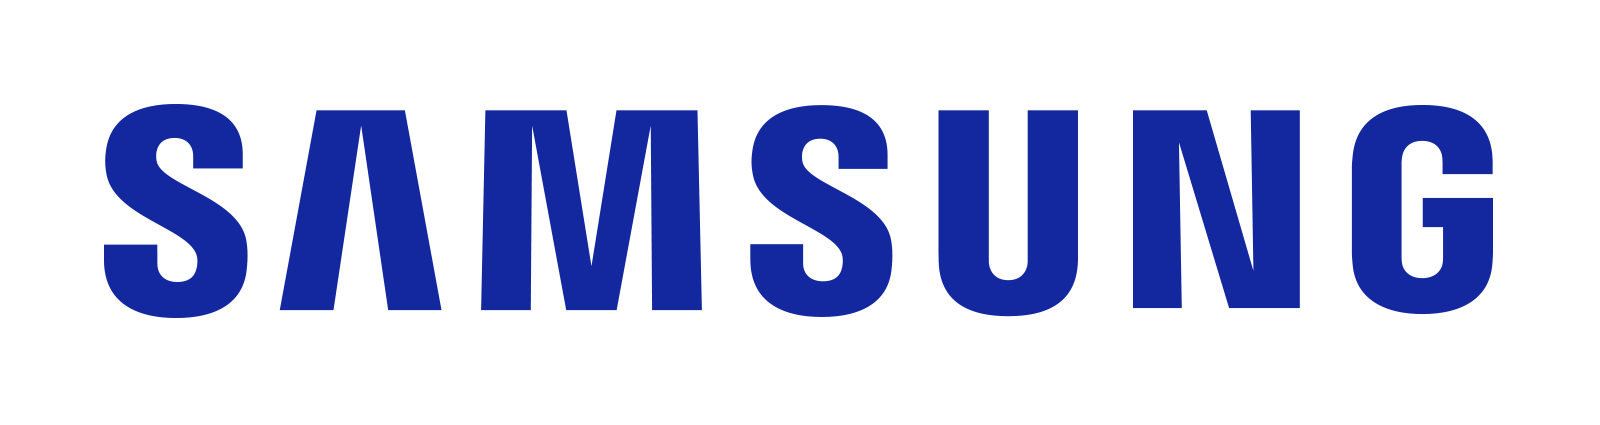 Customer Claims Analyst to Samsung